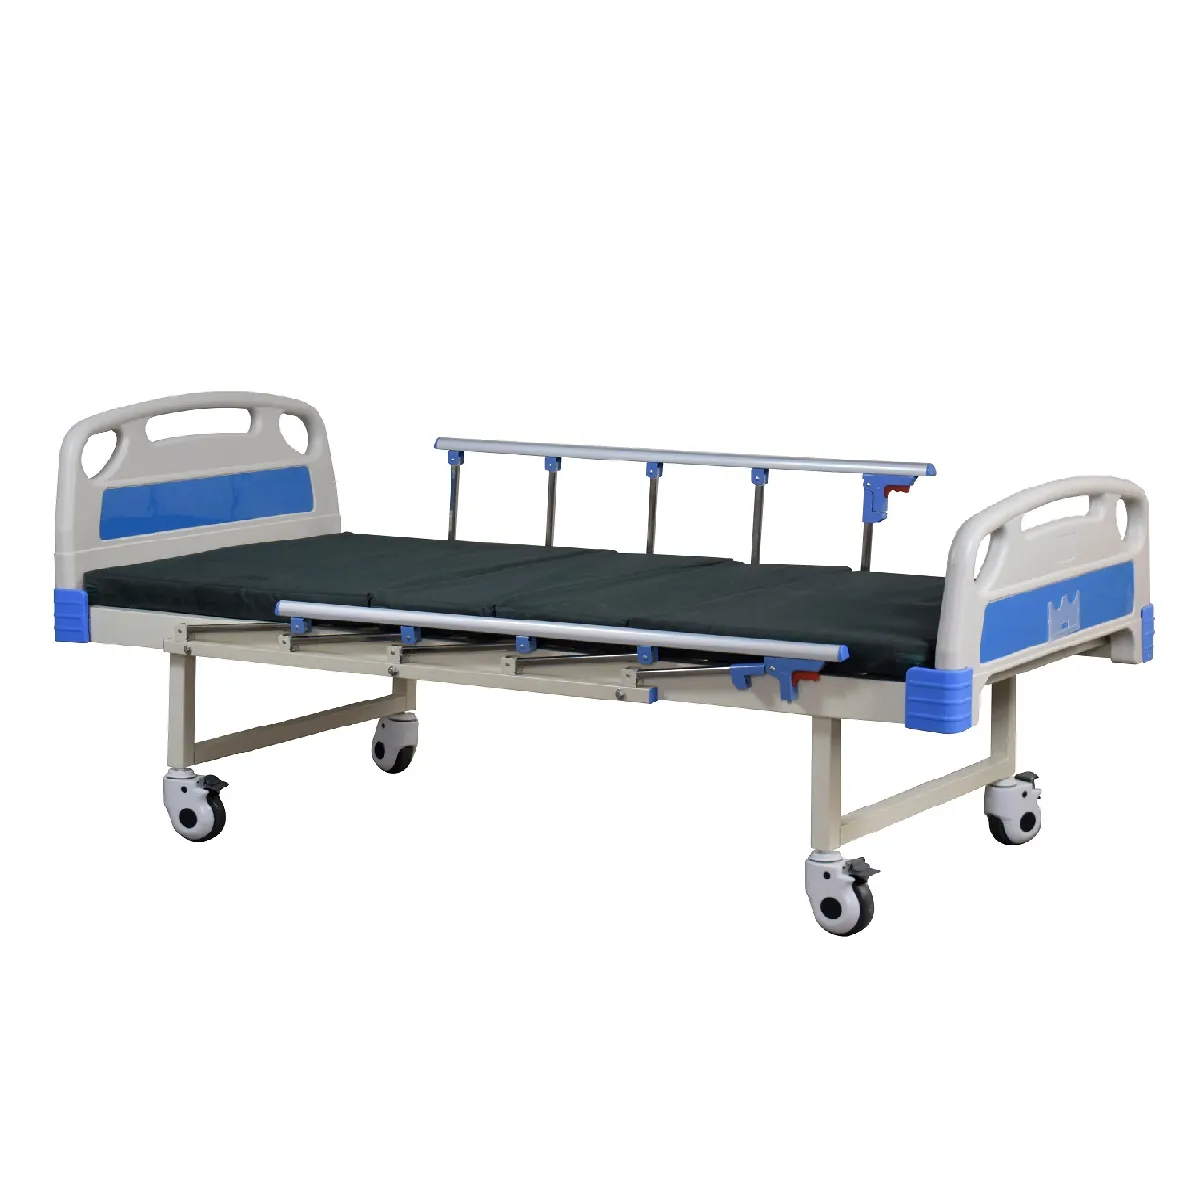 High Quality Lowest Price Movable Flat Examining Table Hospital Bed with Casters